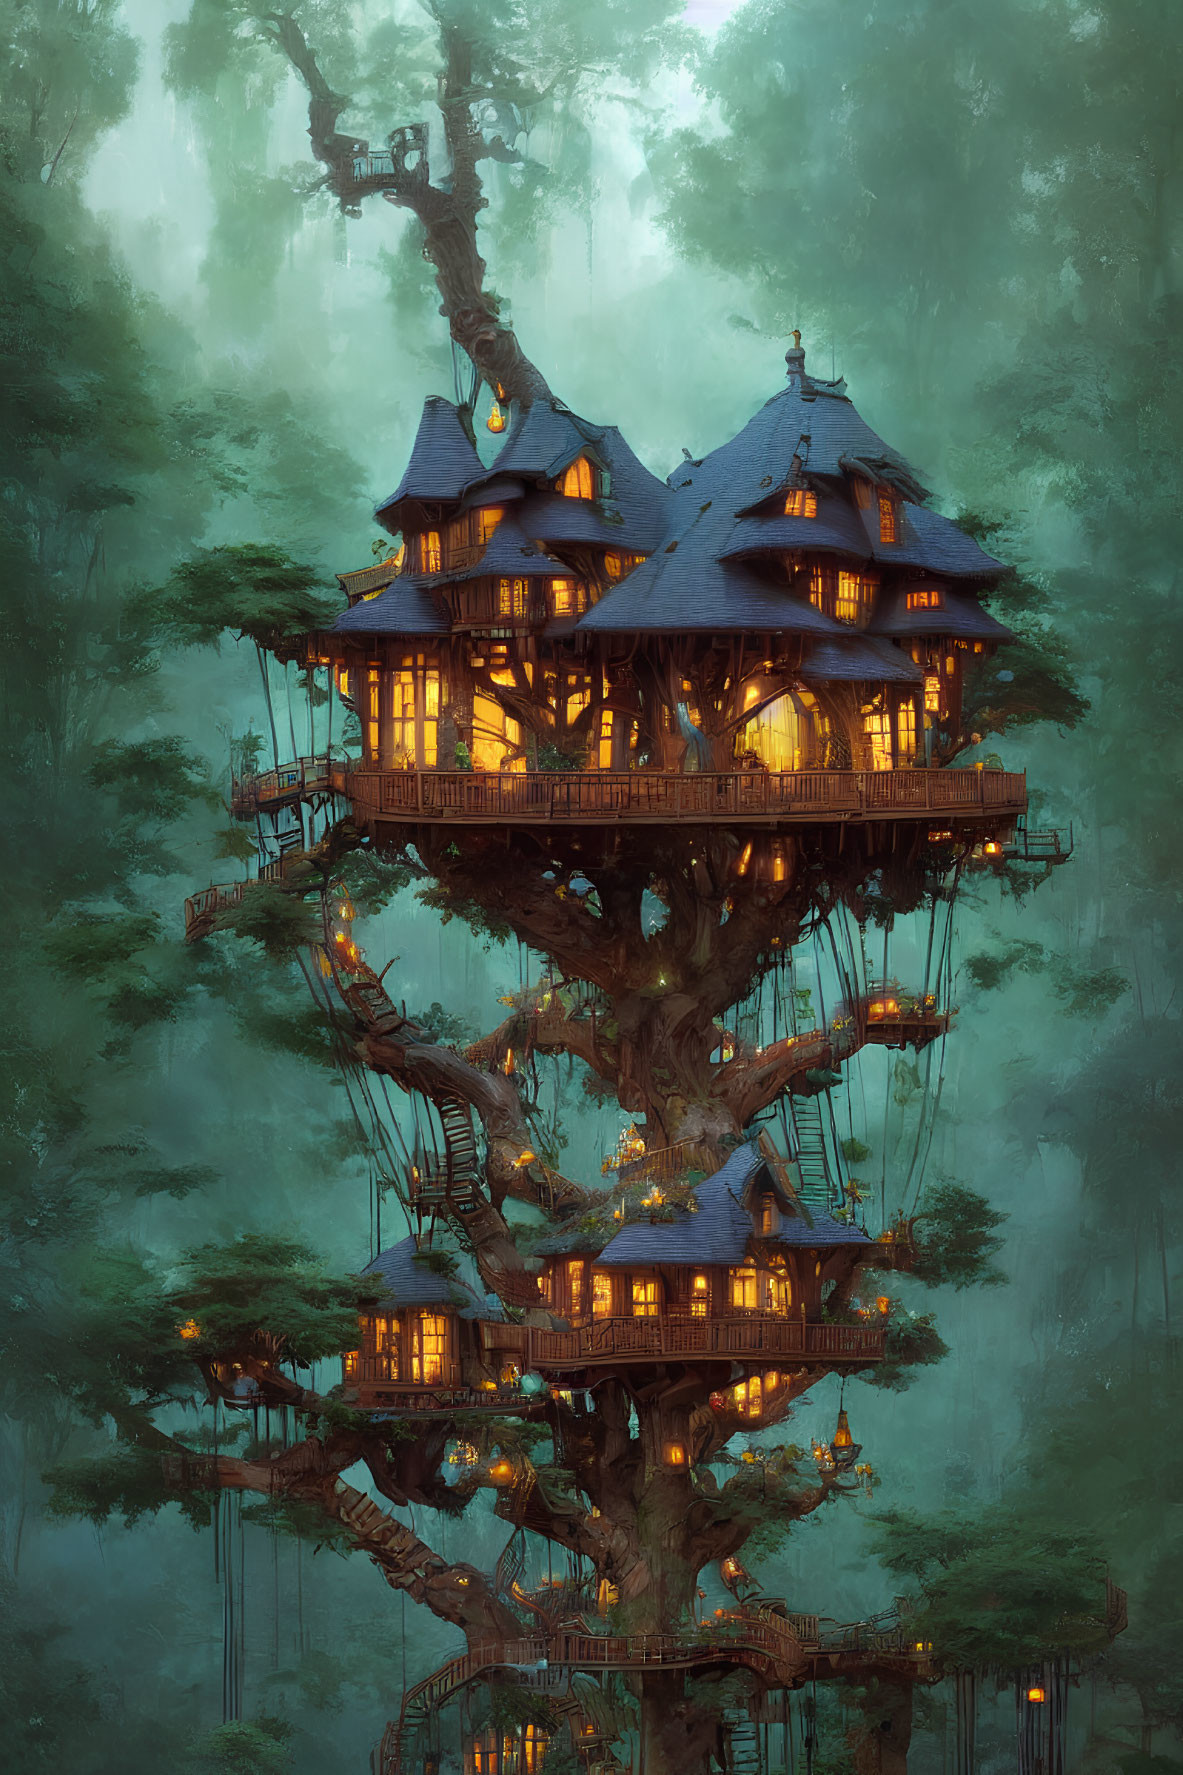 Multi-level glowing window treehouse in lush foggy forest